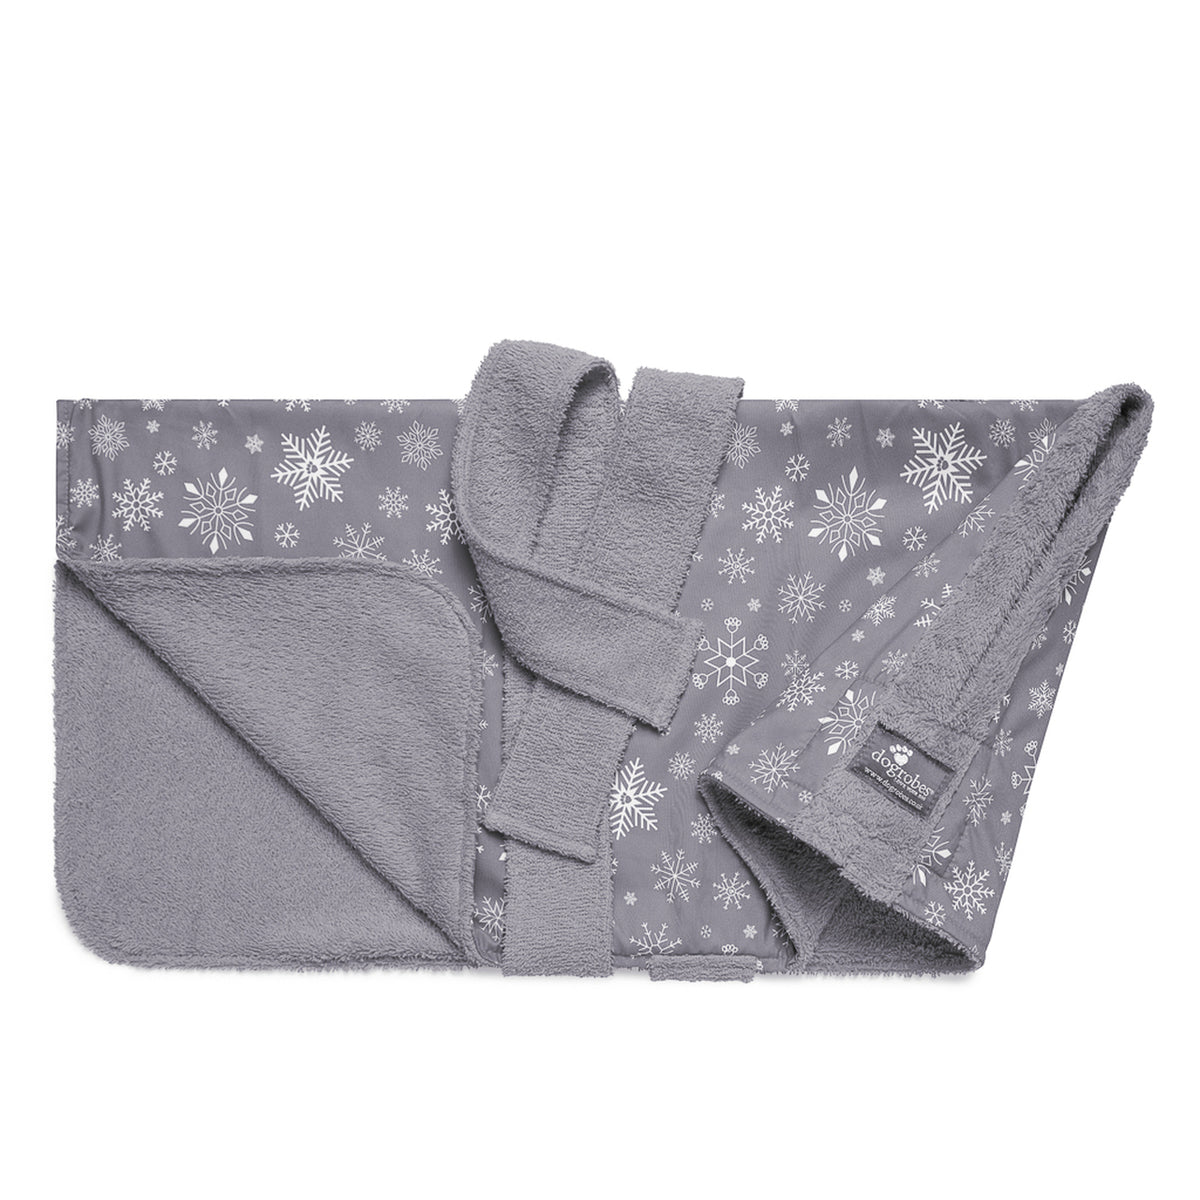 Exclusive collection DogRobe drying coat, with harness access opening in Grey Snowflake pattern.